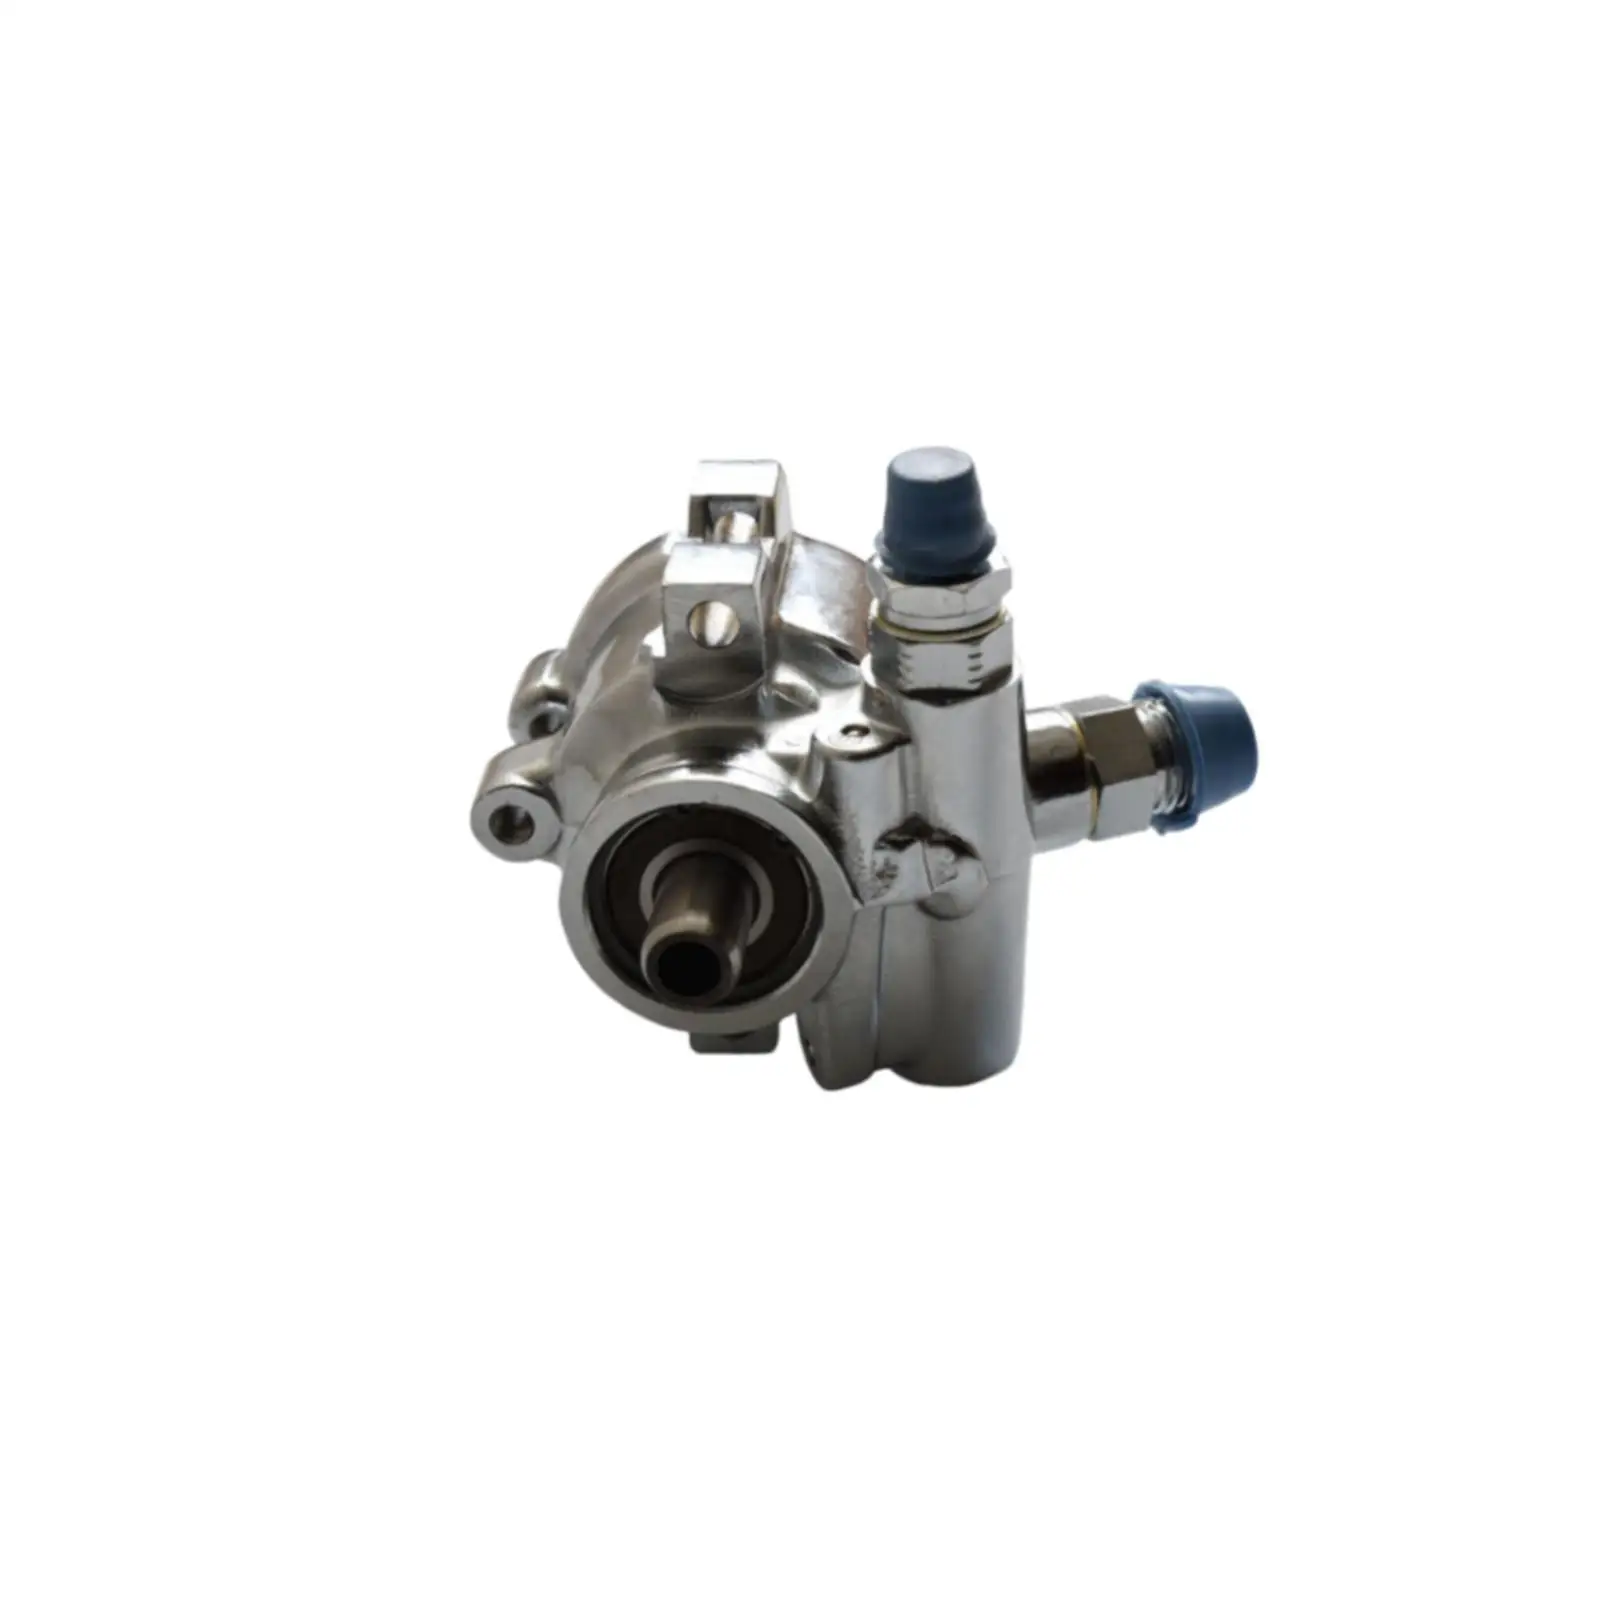 Power Steering Pump Durable Replacement Car Accessories for Type 2 Professional Sturdy Easy to Install High Performance